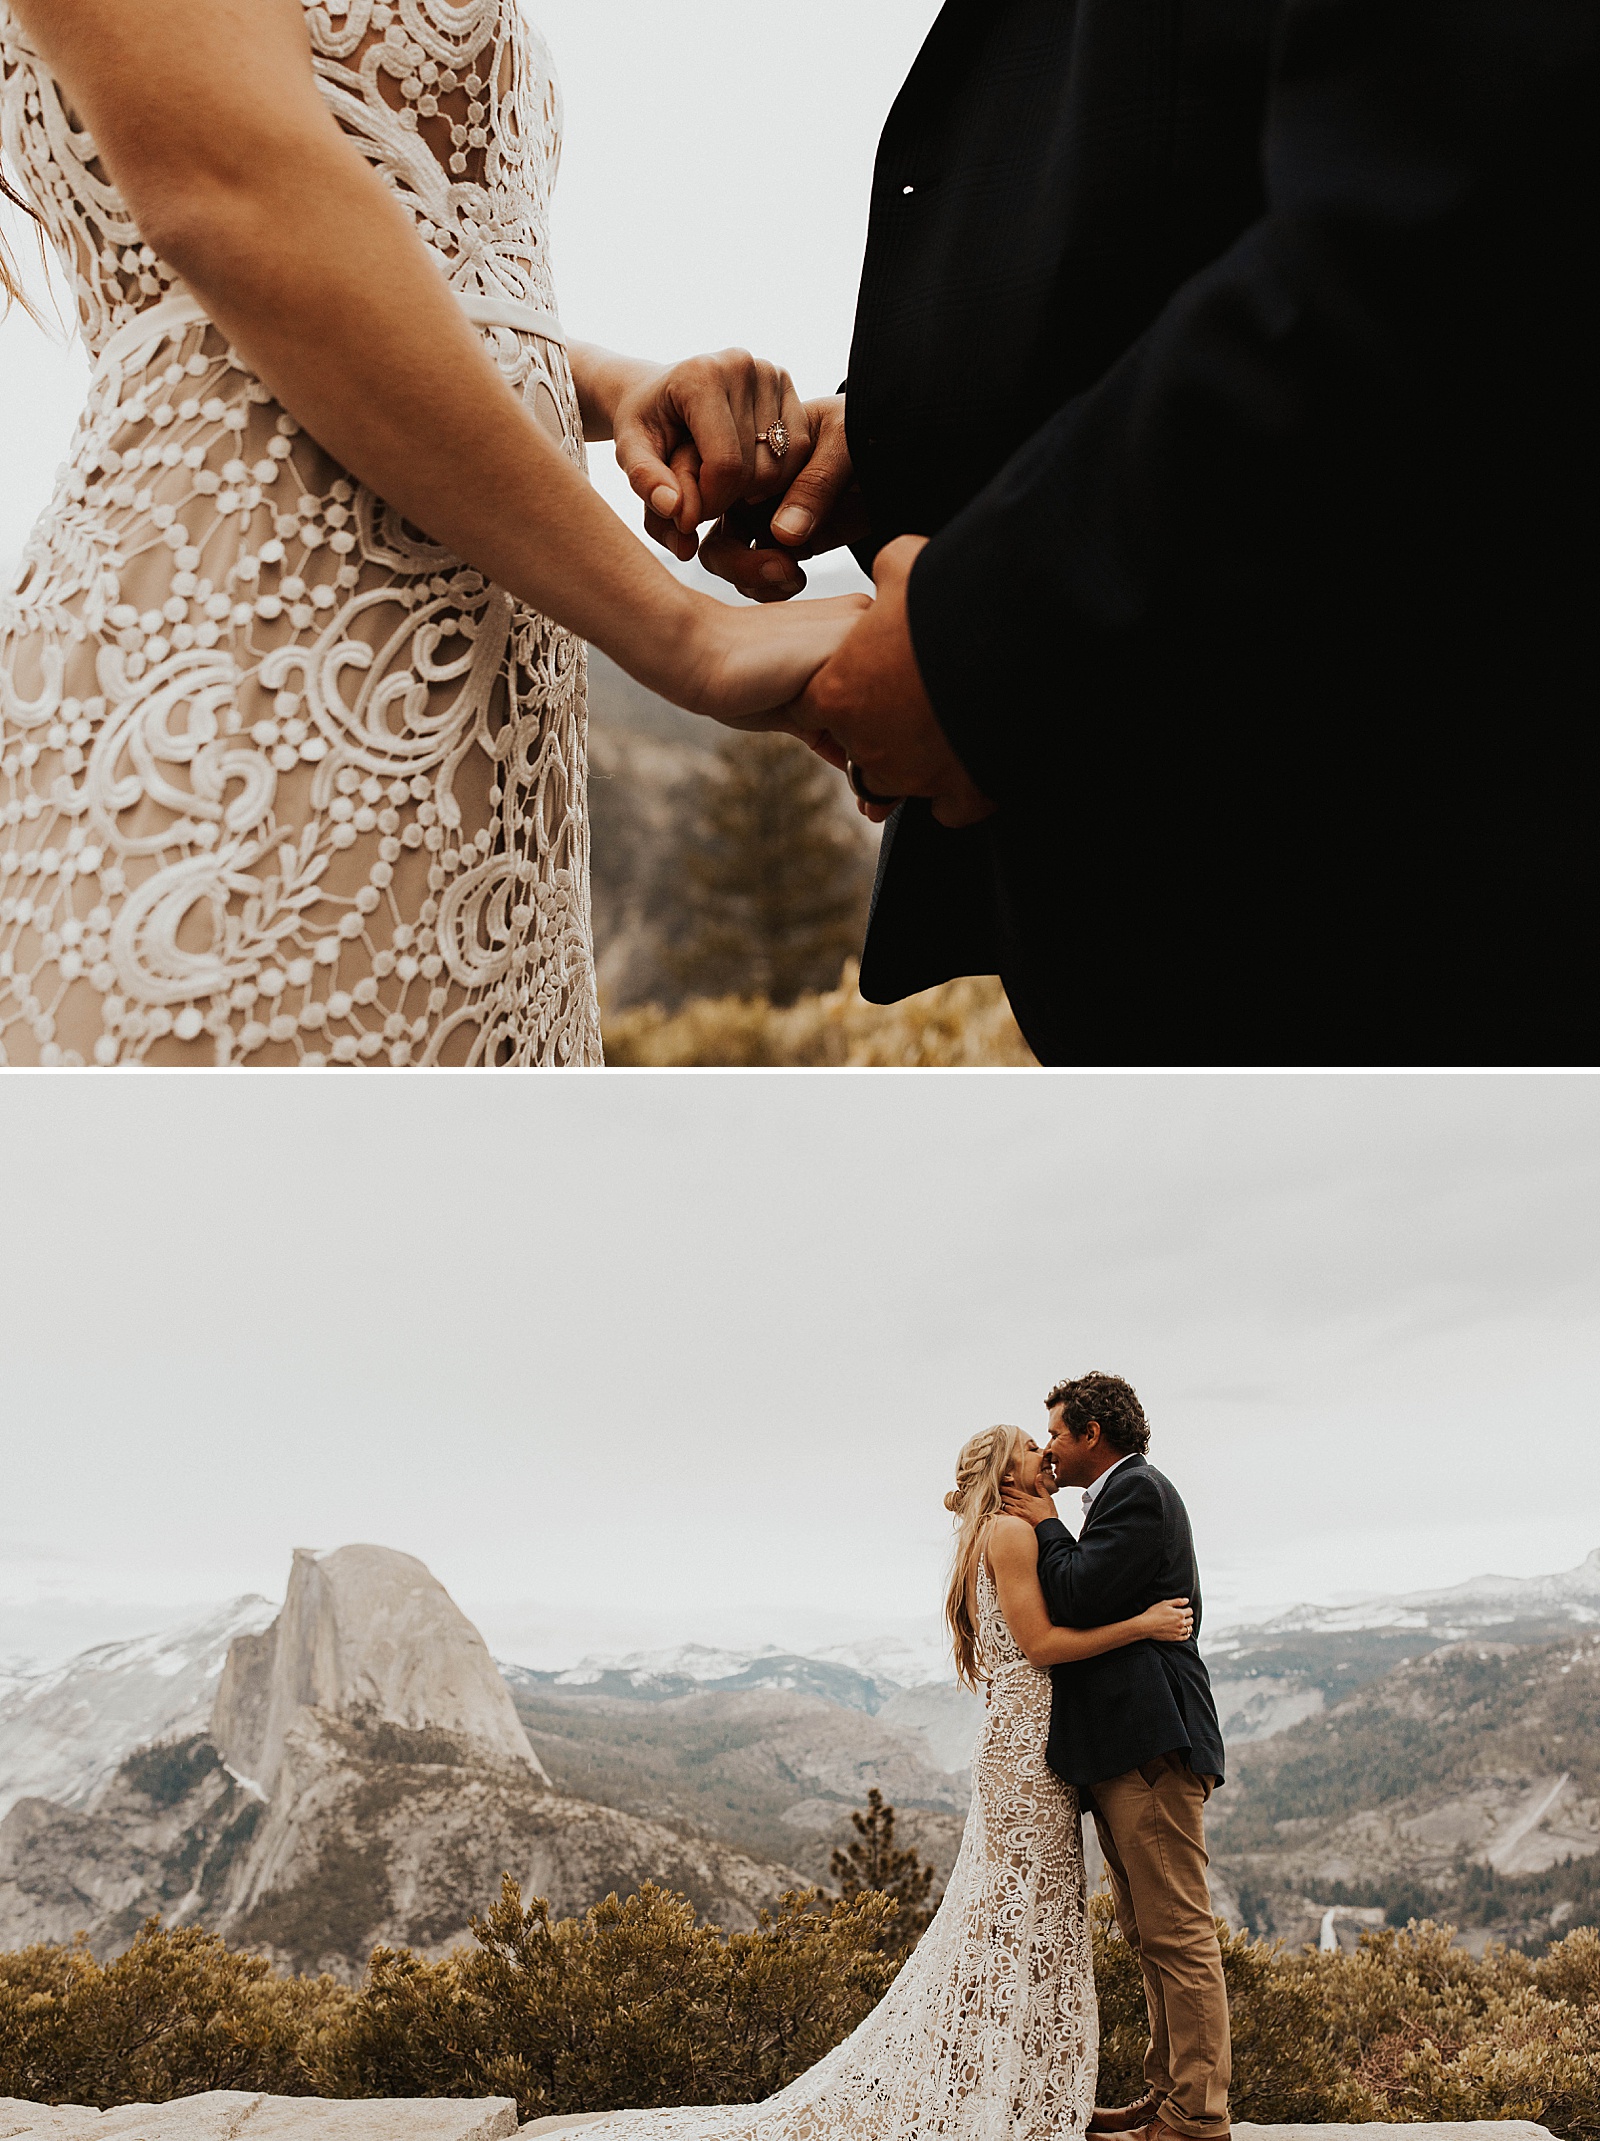 A bride and groom photo on Glacier Point at Yosemite National Park.